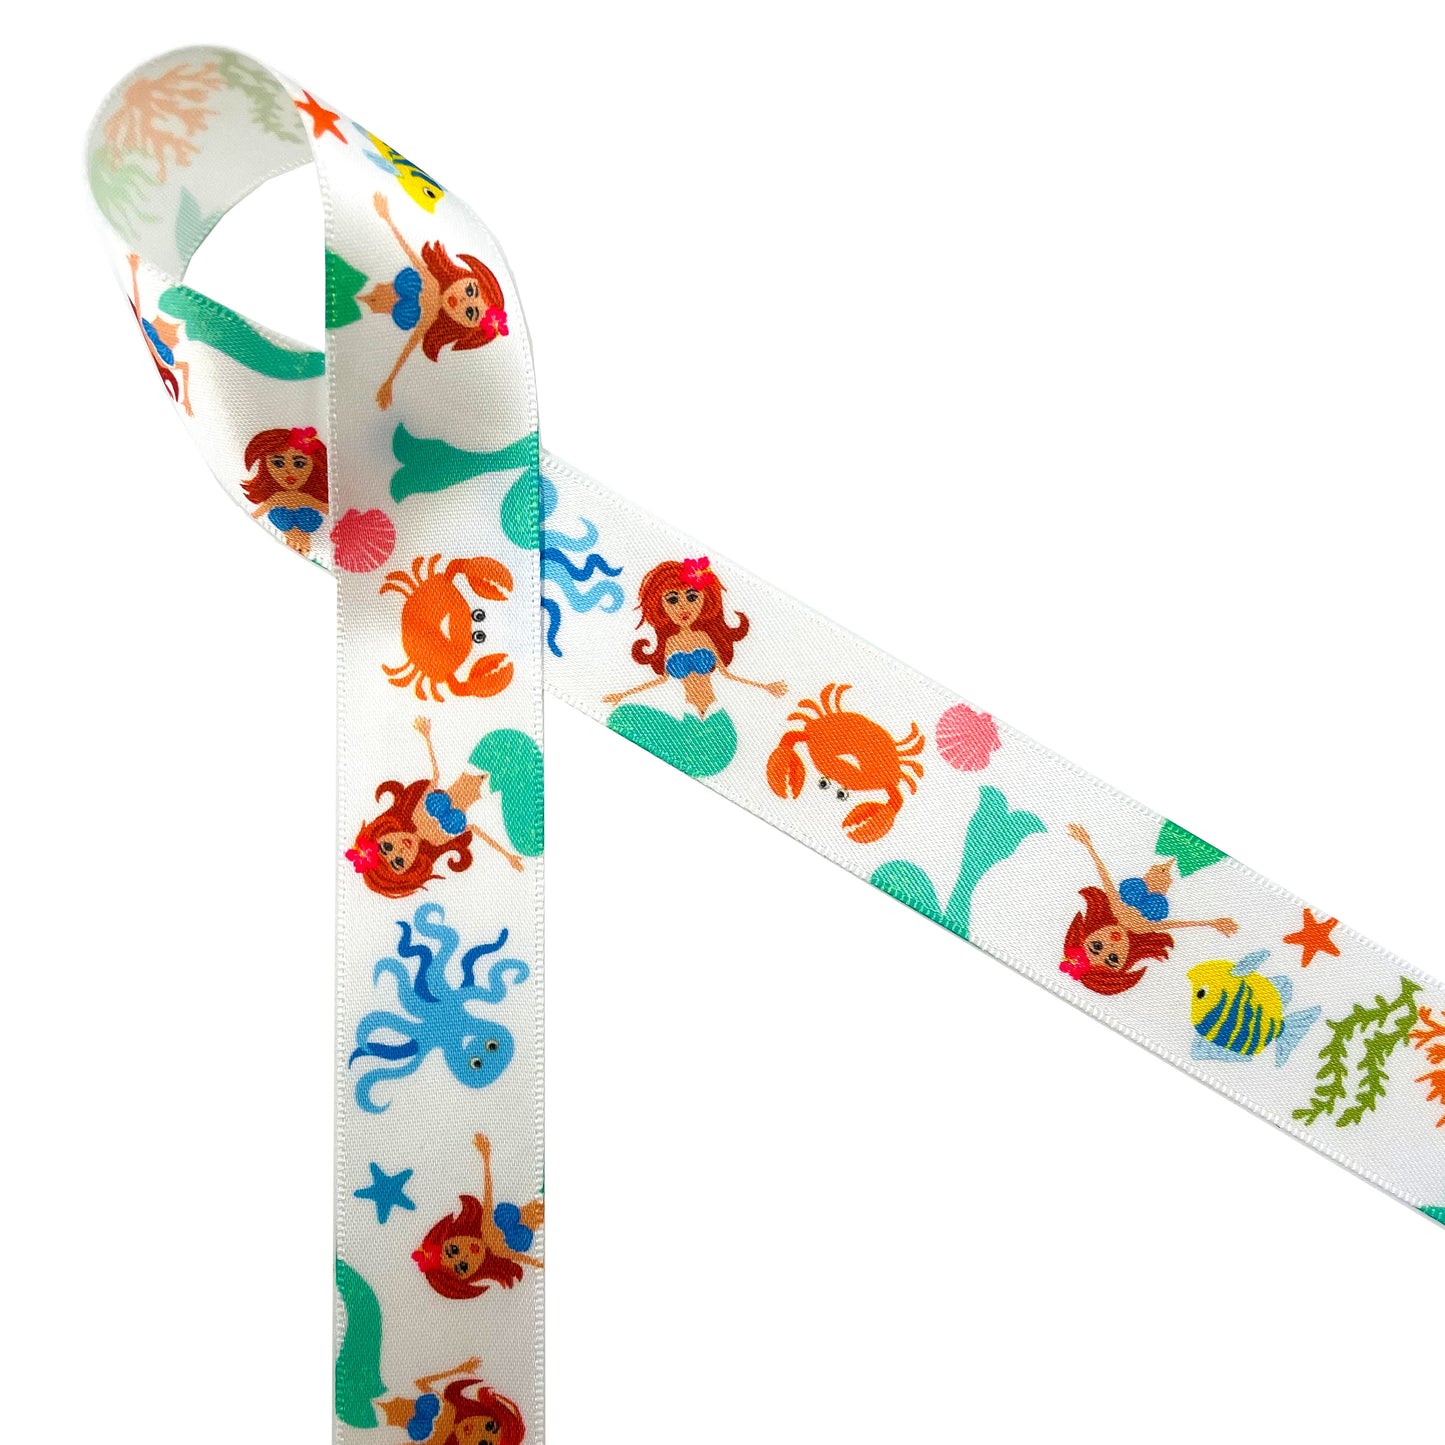 Mermaids with red flowing hair sit among sea creatures including crabs, tropical fish, octopus, star fish and coral reef printed on 7/8" white single face satin ribbon. This lovely ribbon is perfect for birthday parties, pool parties, beach parties and Summer theme parties. Use this ribbon for gift wrap, gift baskets, party decor, party favors, cookies and cake pops. This is a great ribbon for hair bows, head bands, quilting and sewing projects too. All our ribbon is designed and printed in the USA